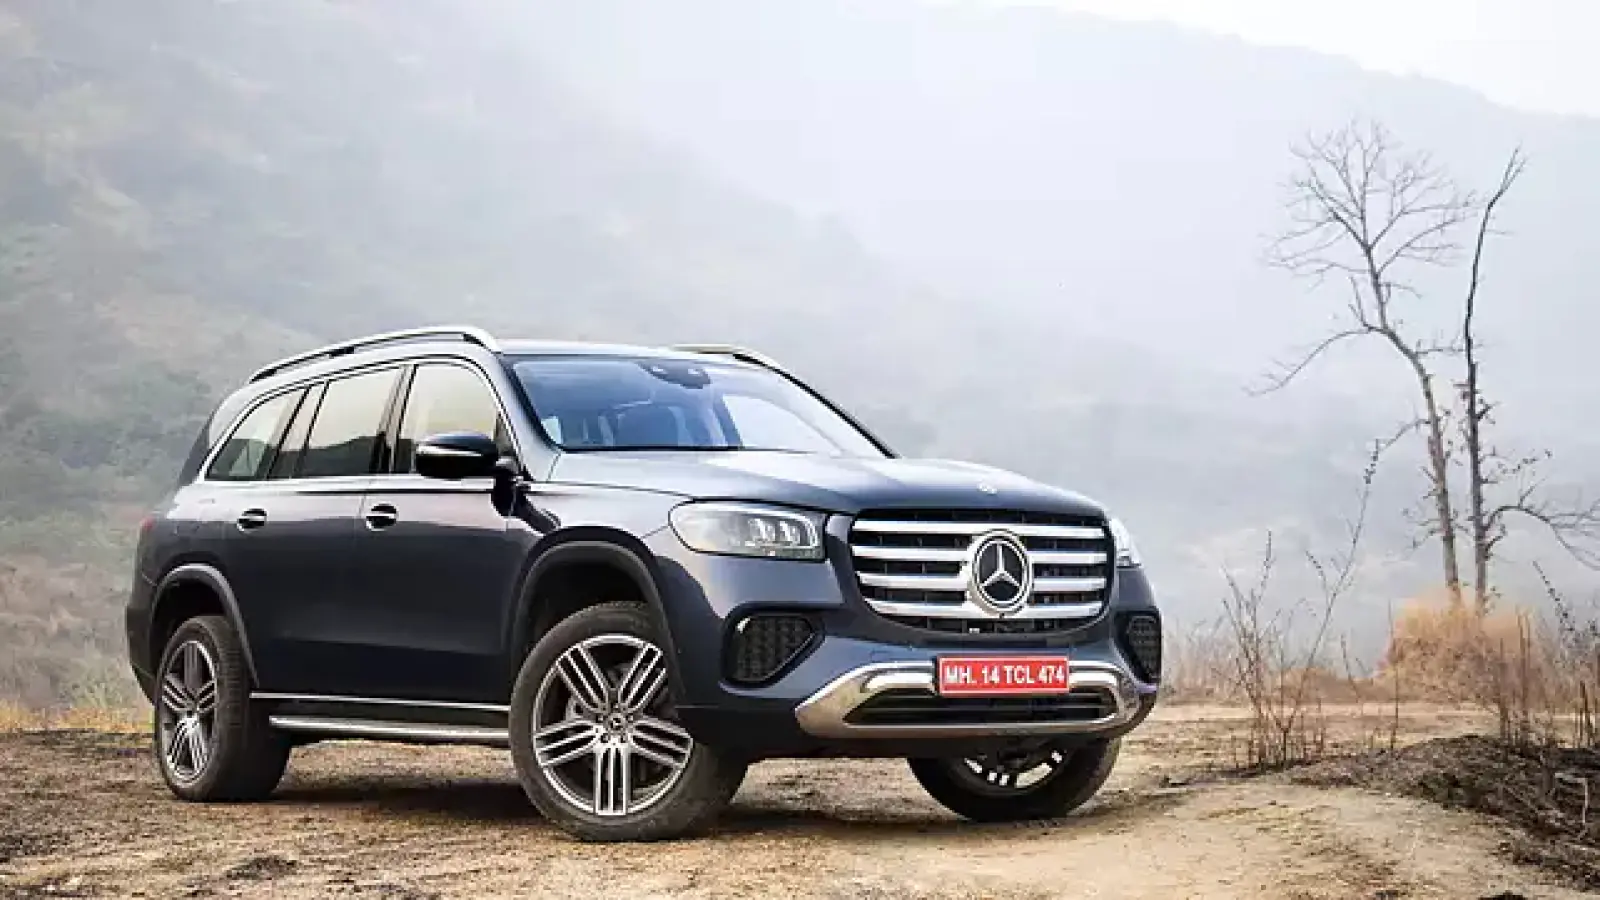 GLS Facelift is available from Mercedes-Benz India for a starting price of Rs 1.32 crore, know details